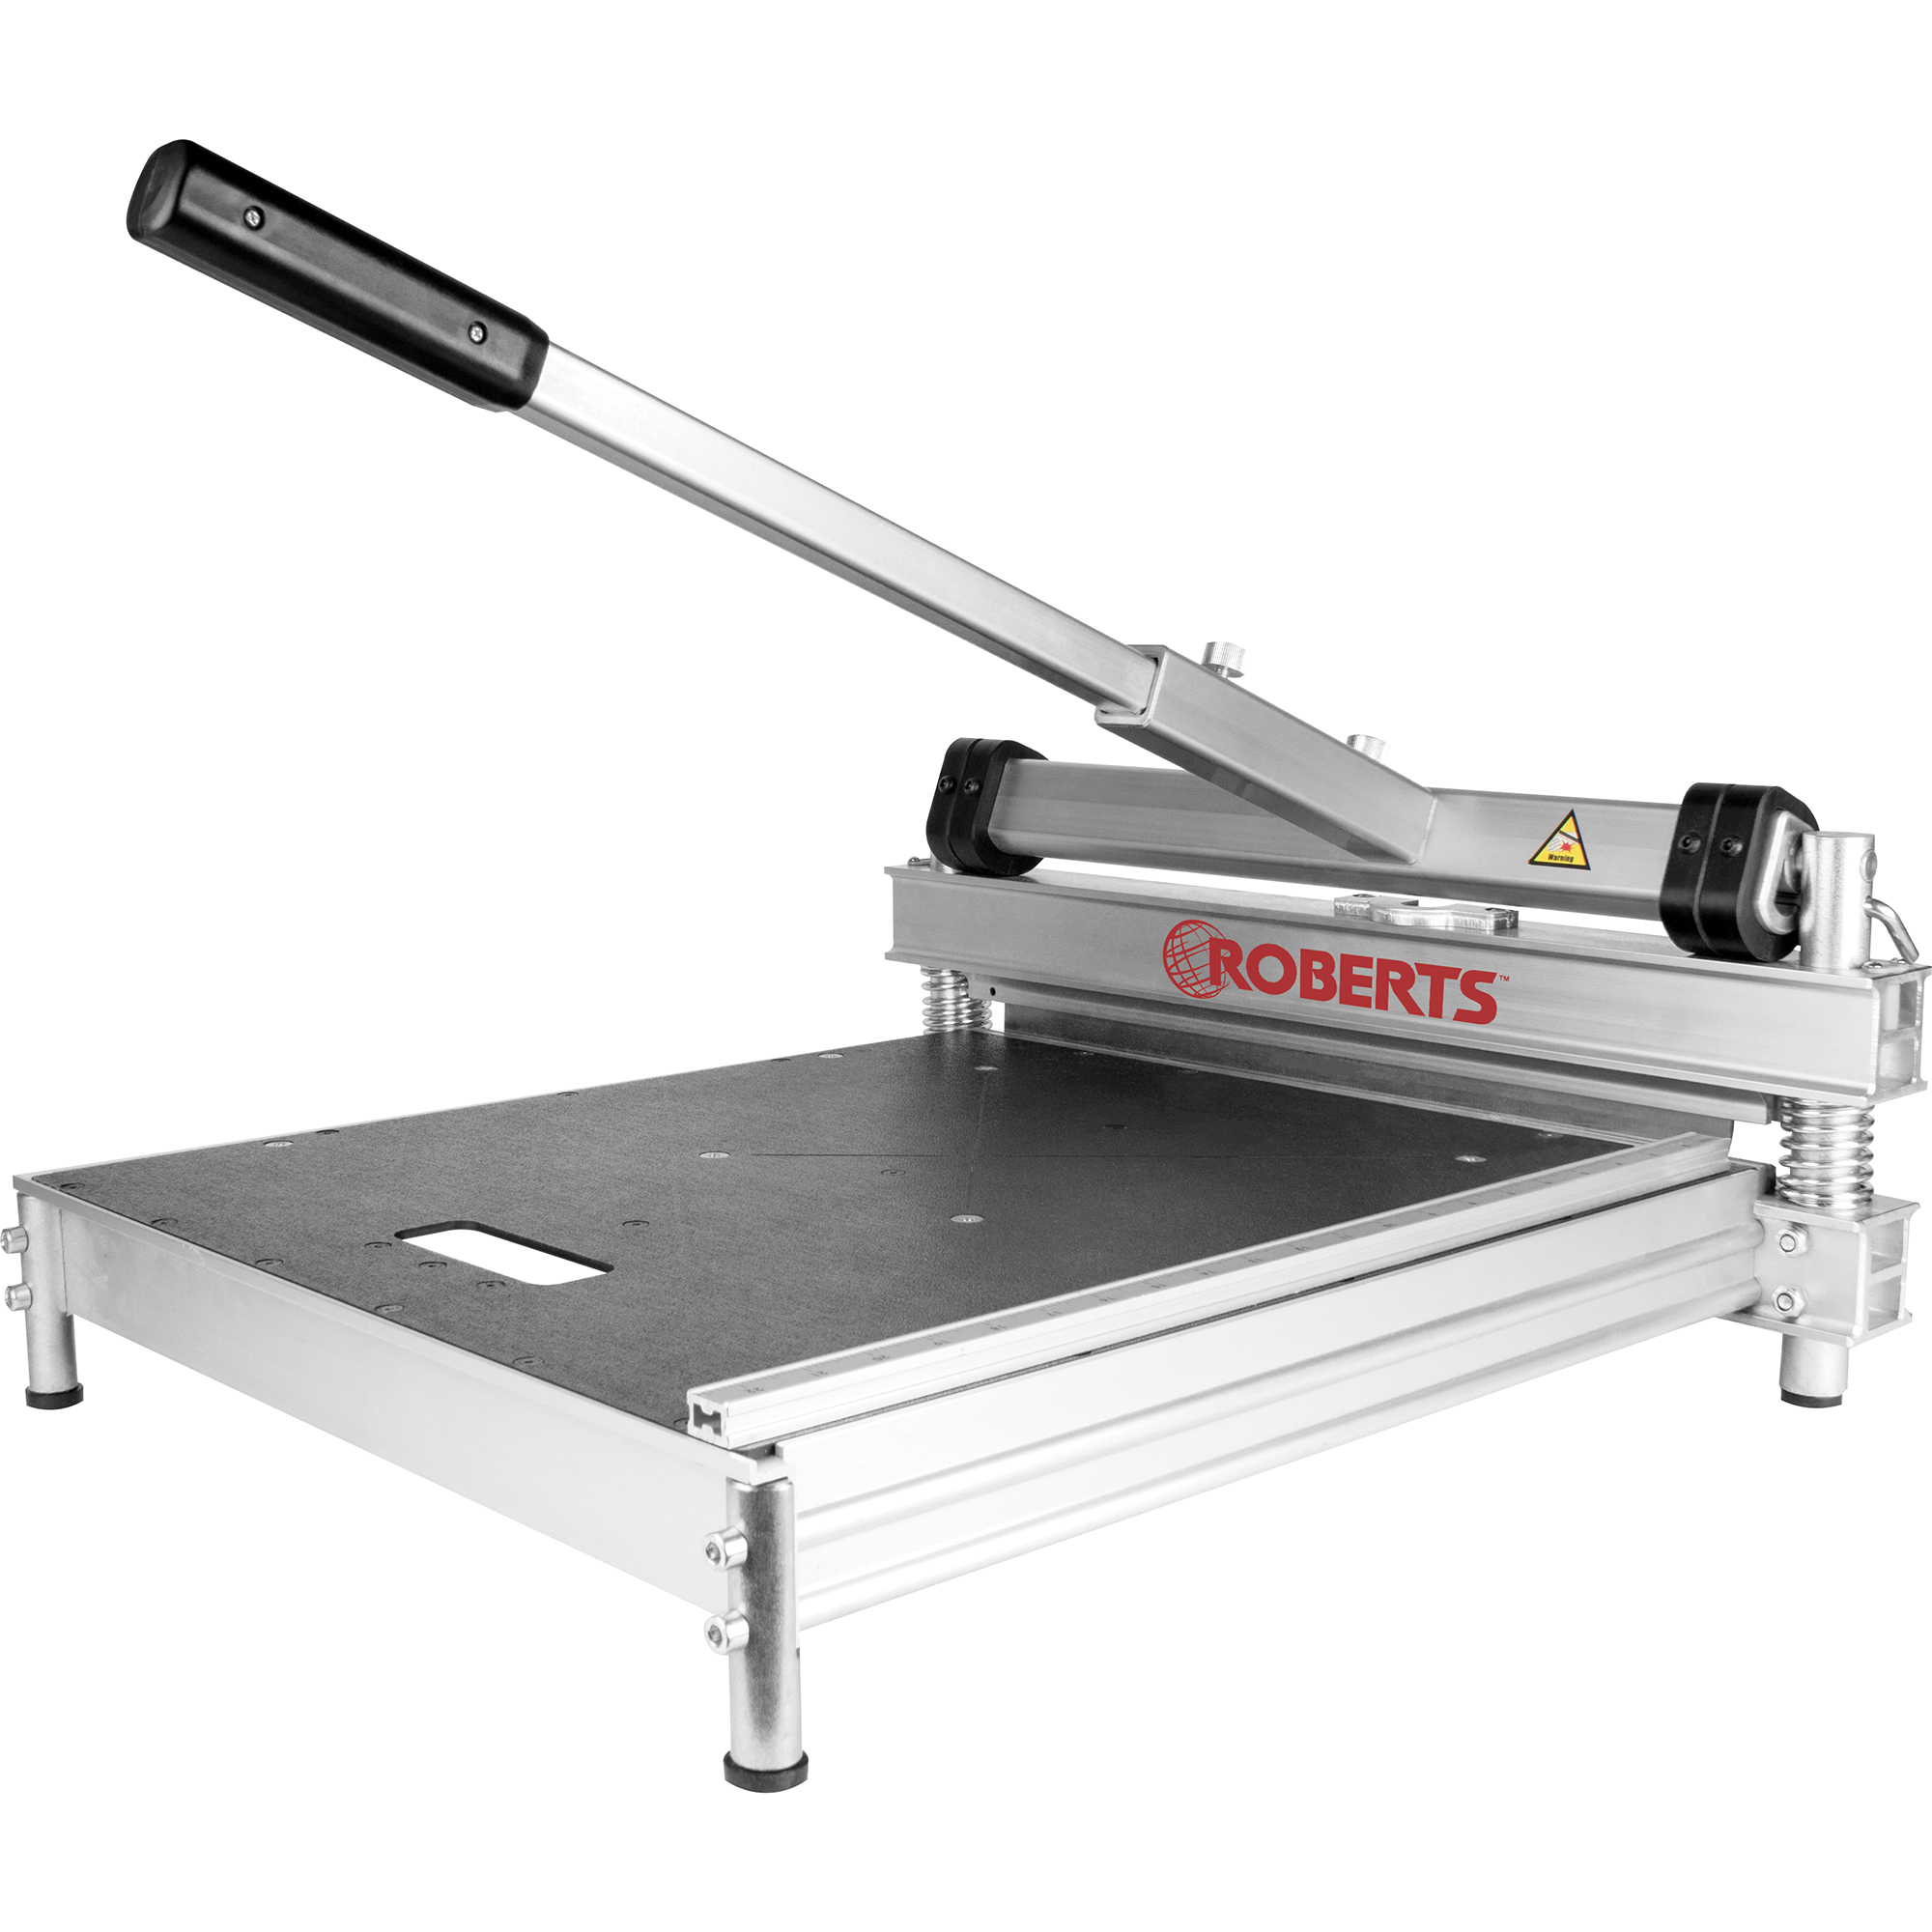 Vinyl Flooring Cutters - Roberts Consolidated